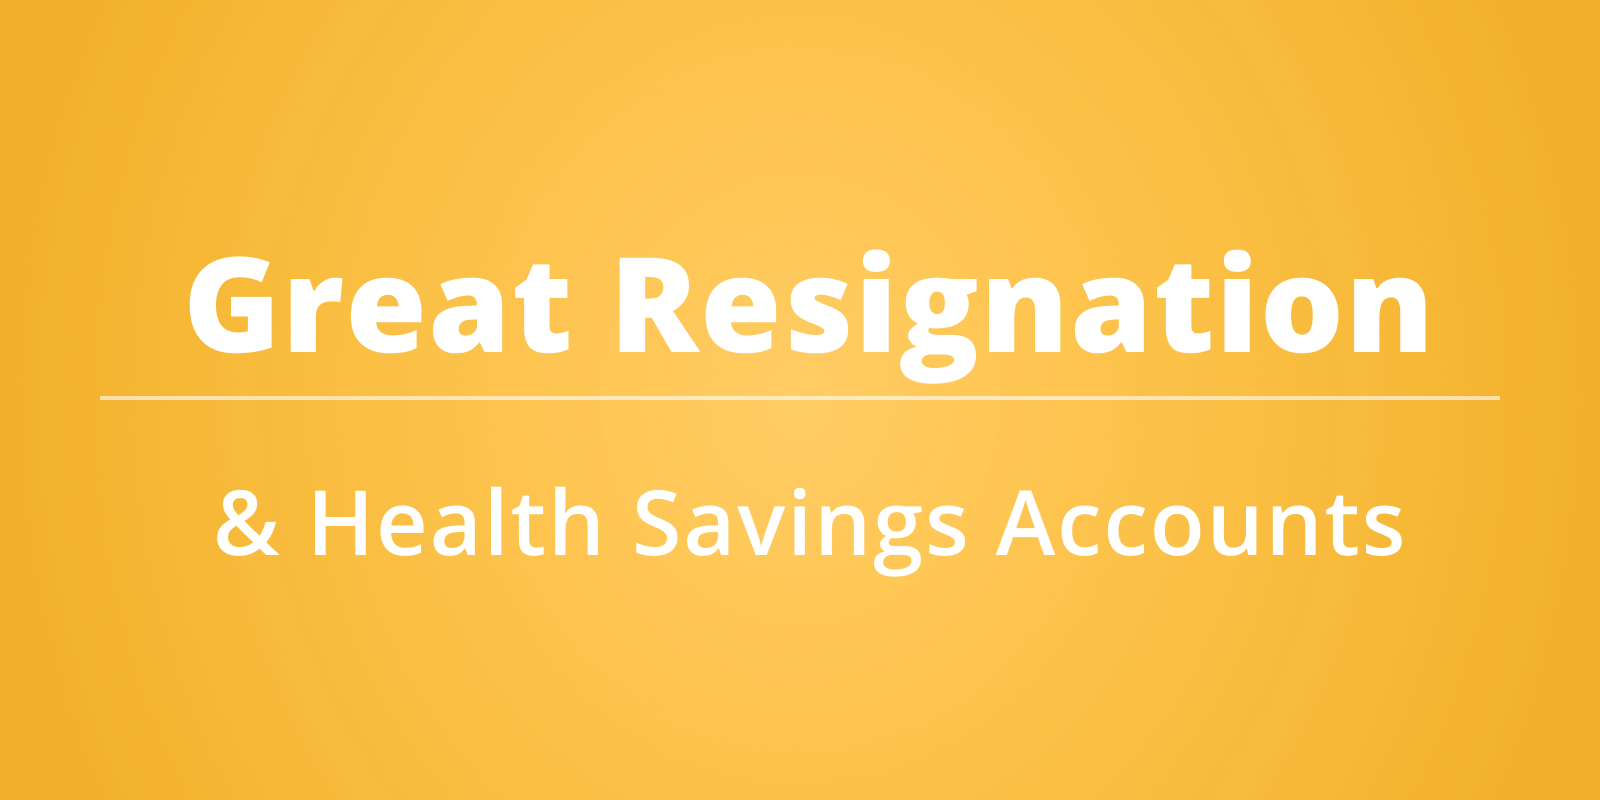 HSAs and the Great Resignation